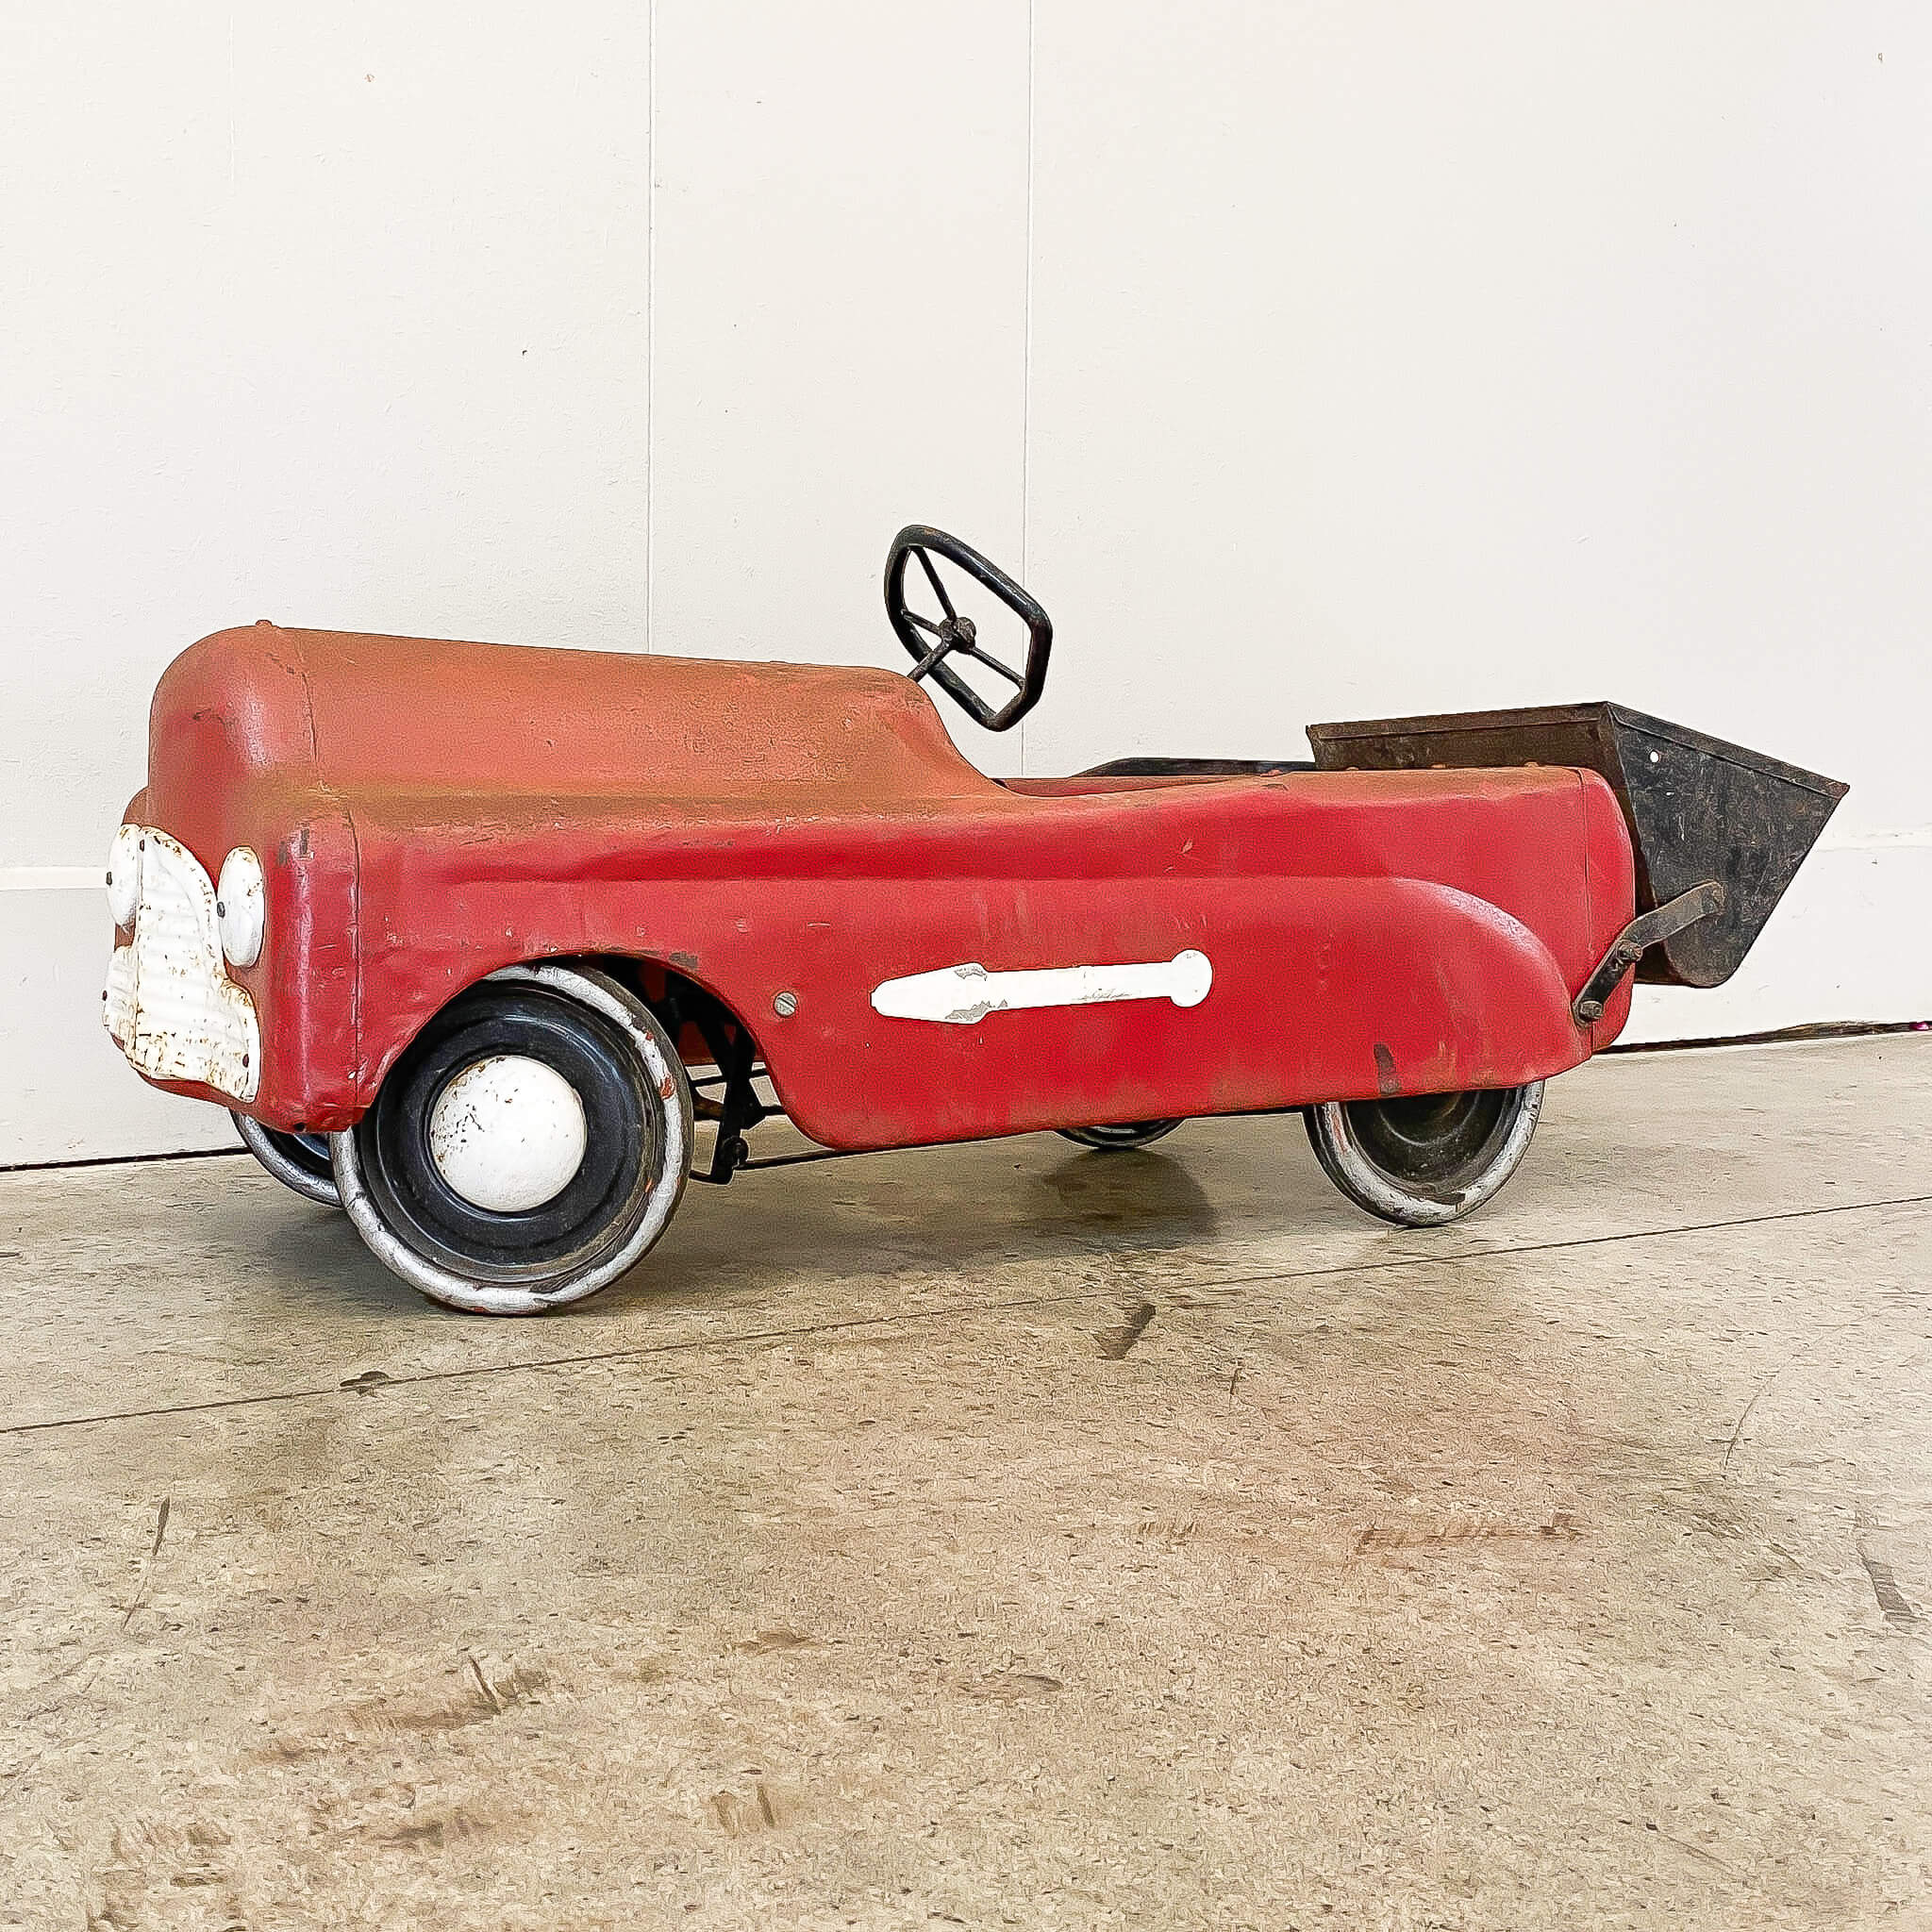 A Vintage Triang Pedal Car